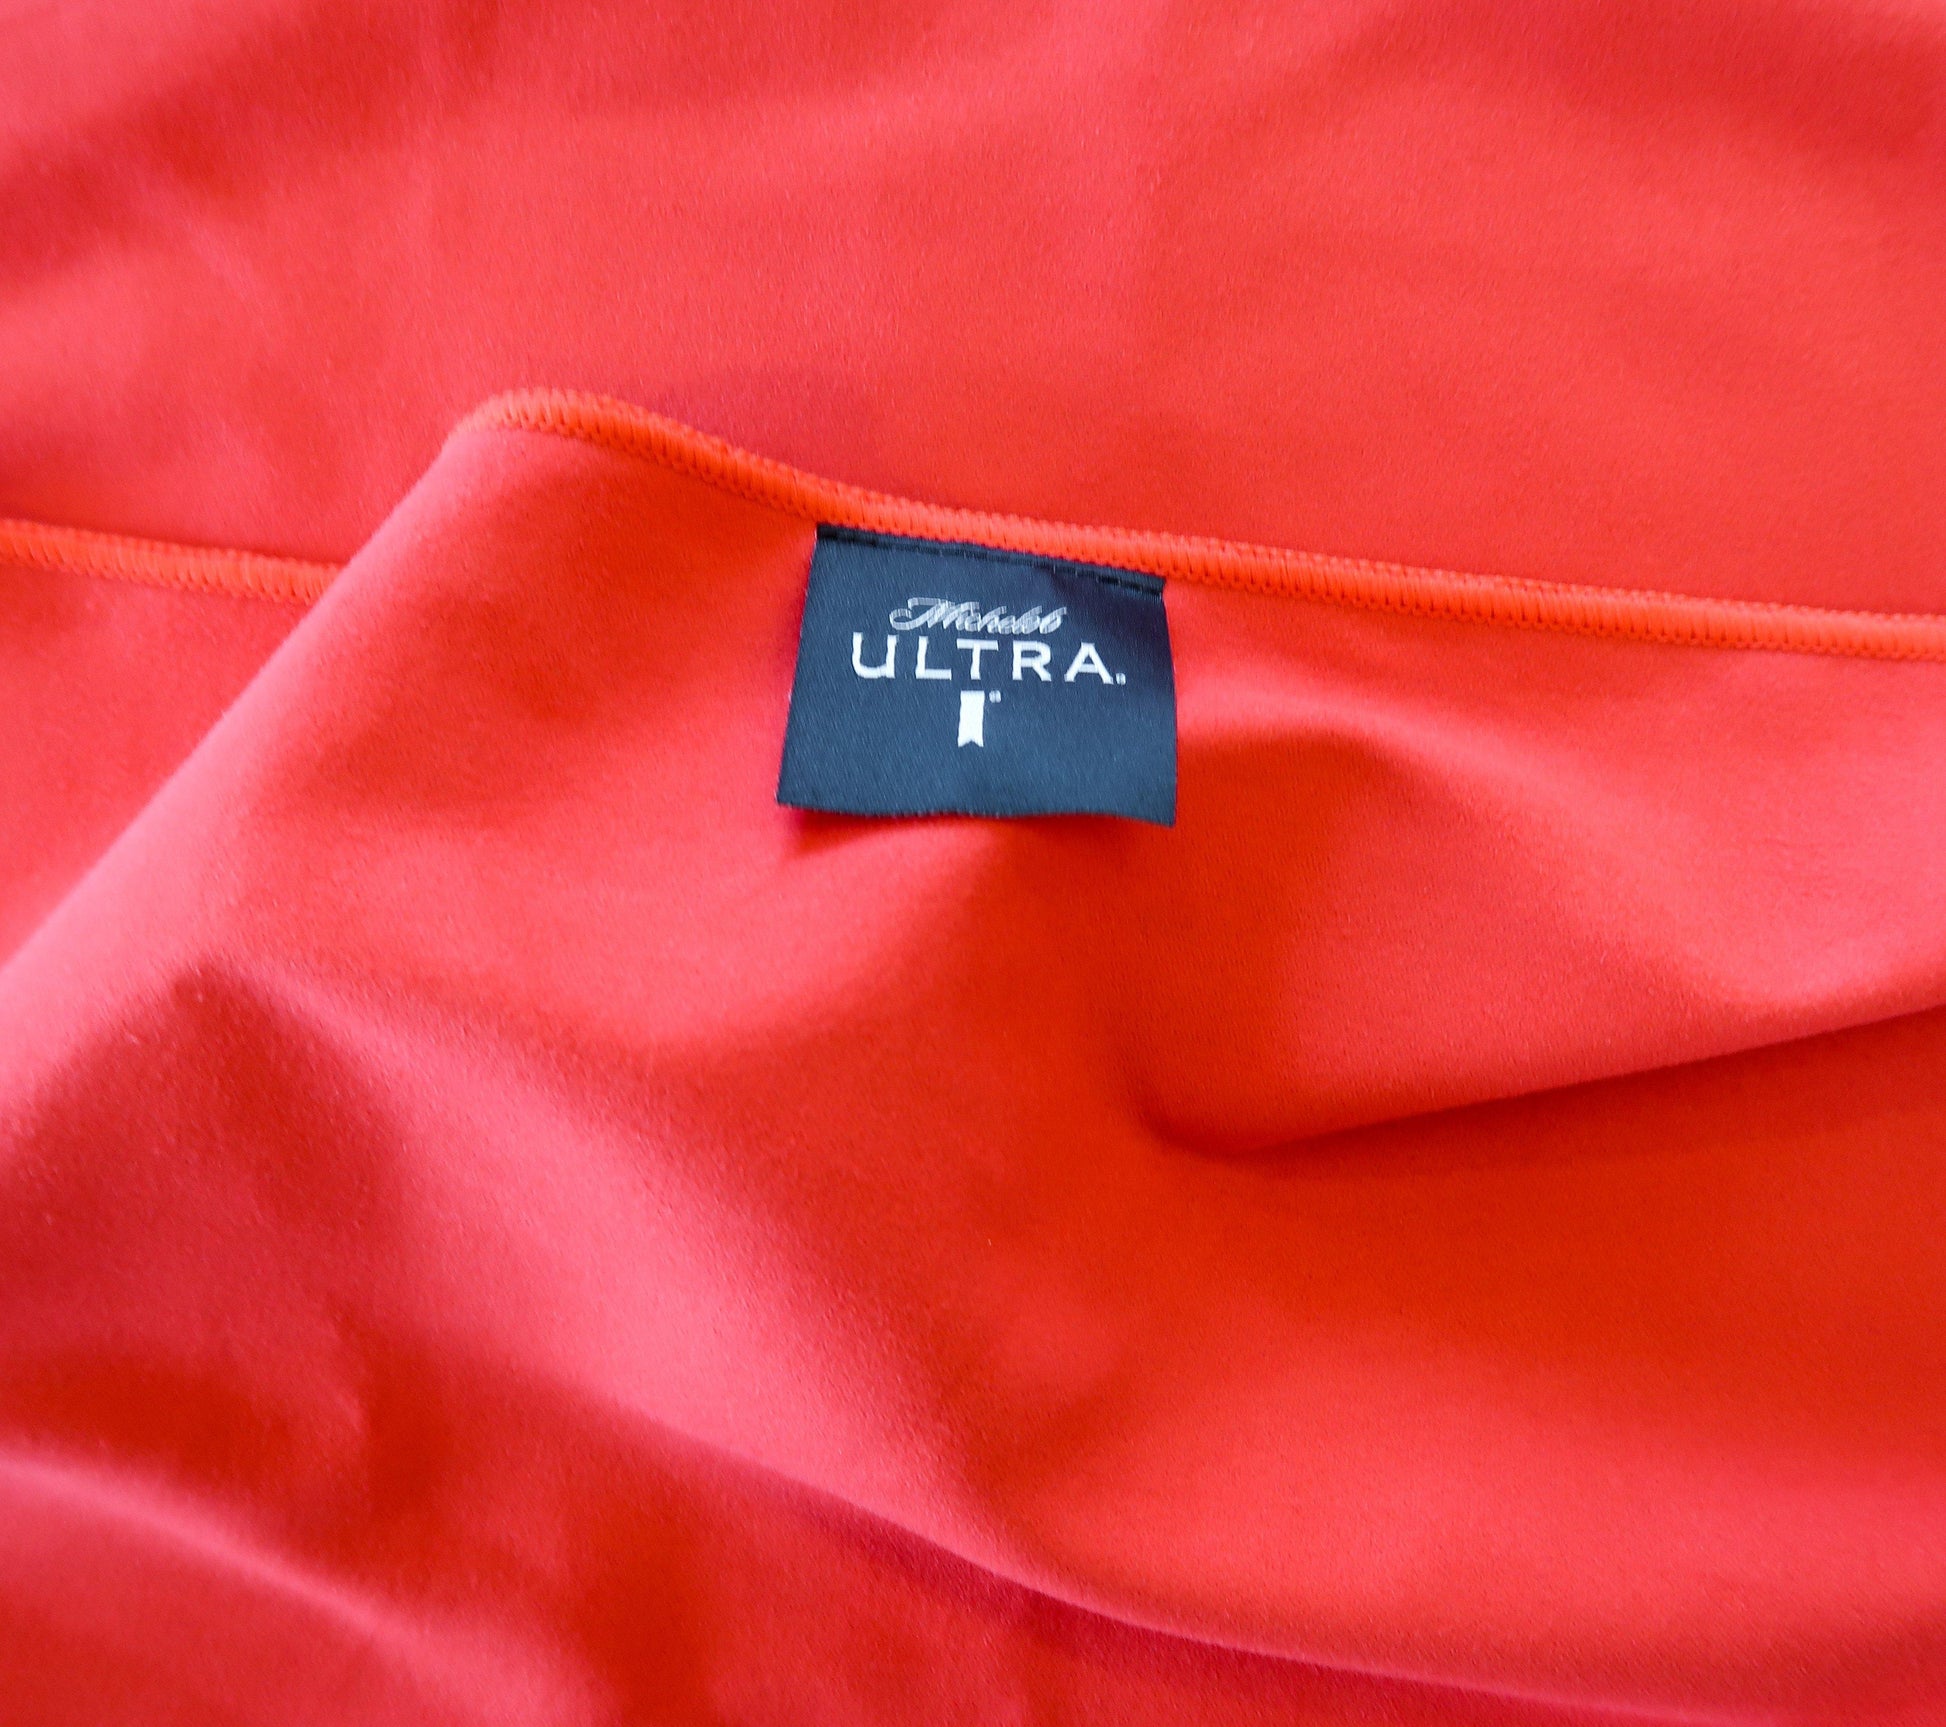 michelob ultra towel upclose of the black tag with logo 